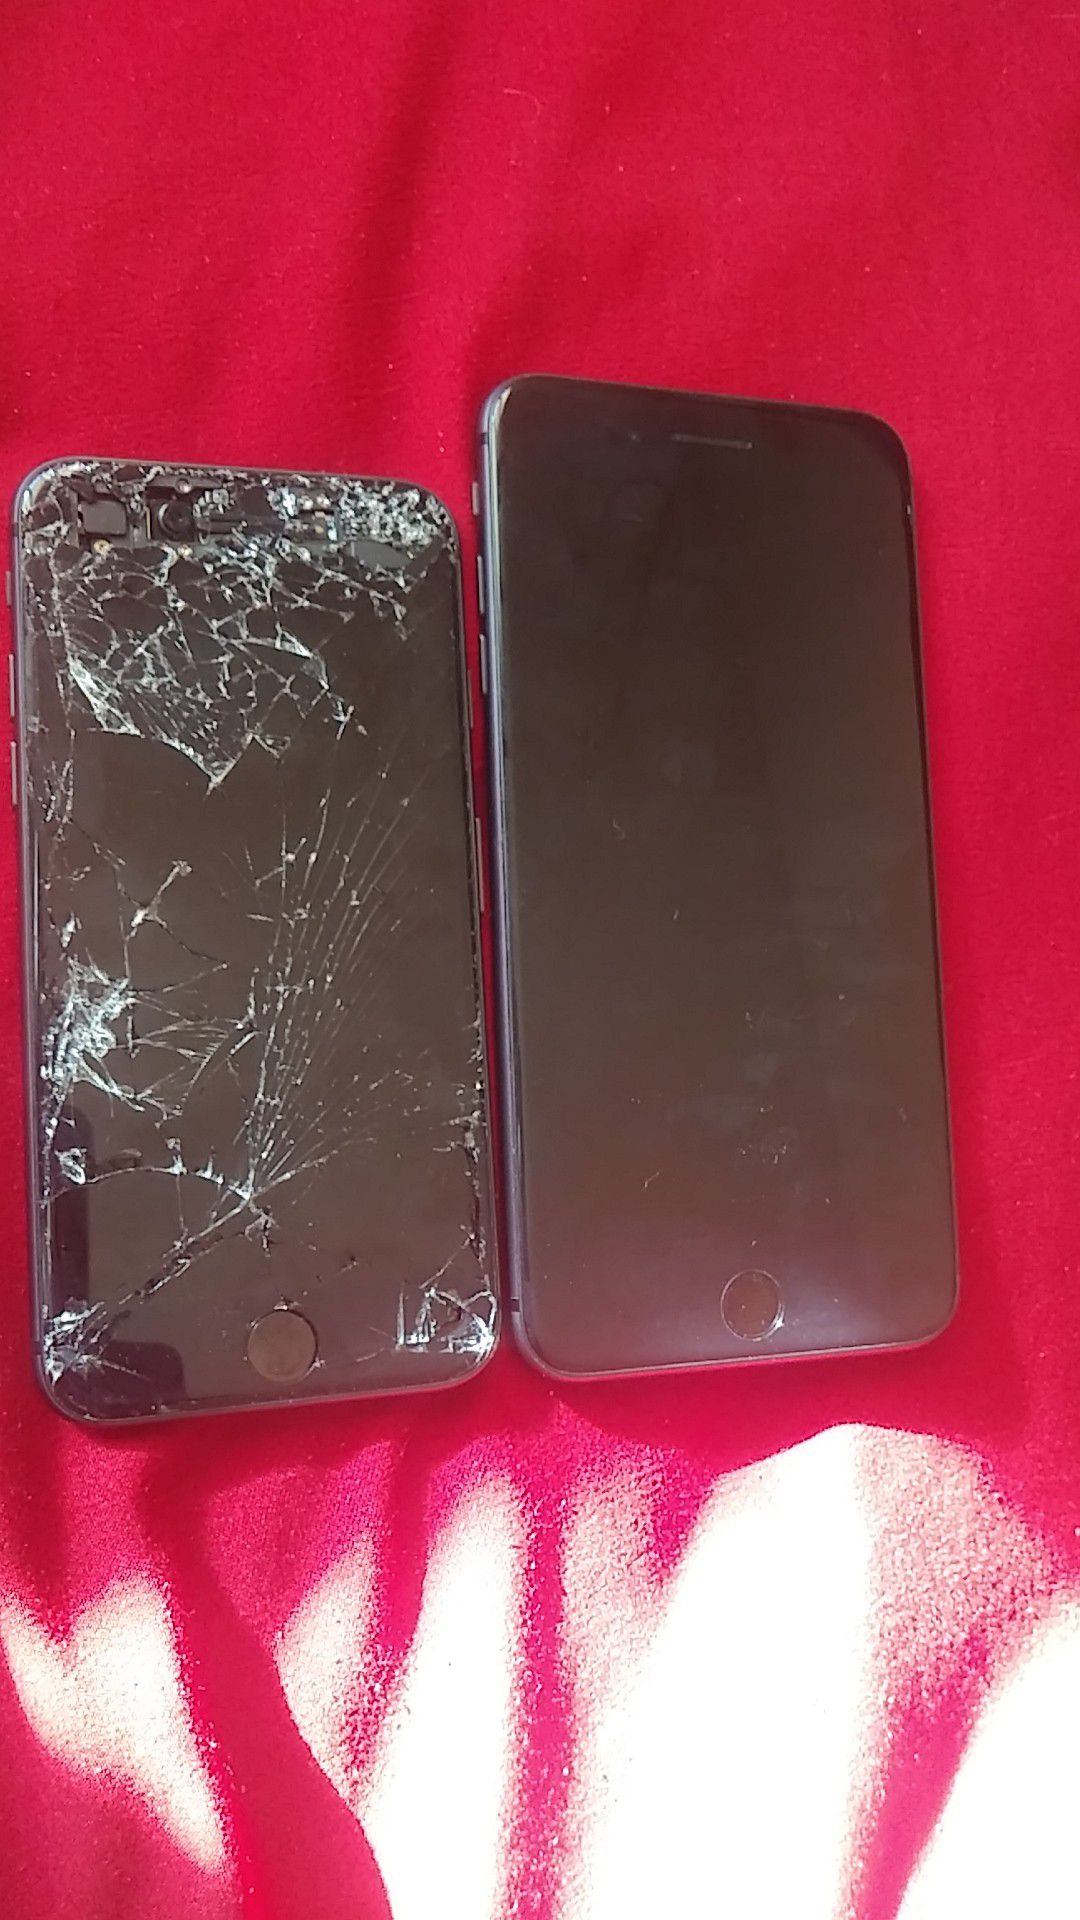 Iphone 7plus screen locked and iphone 8 for parts .